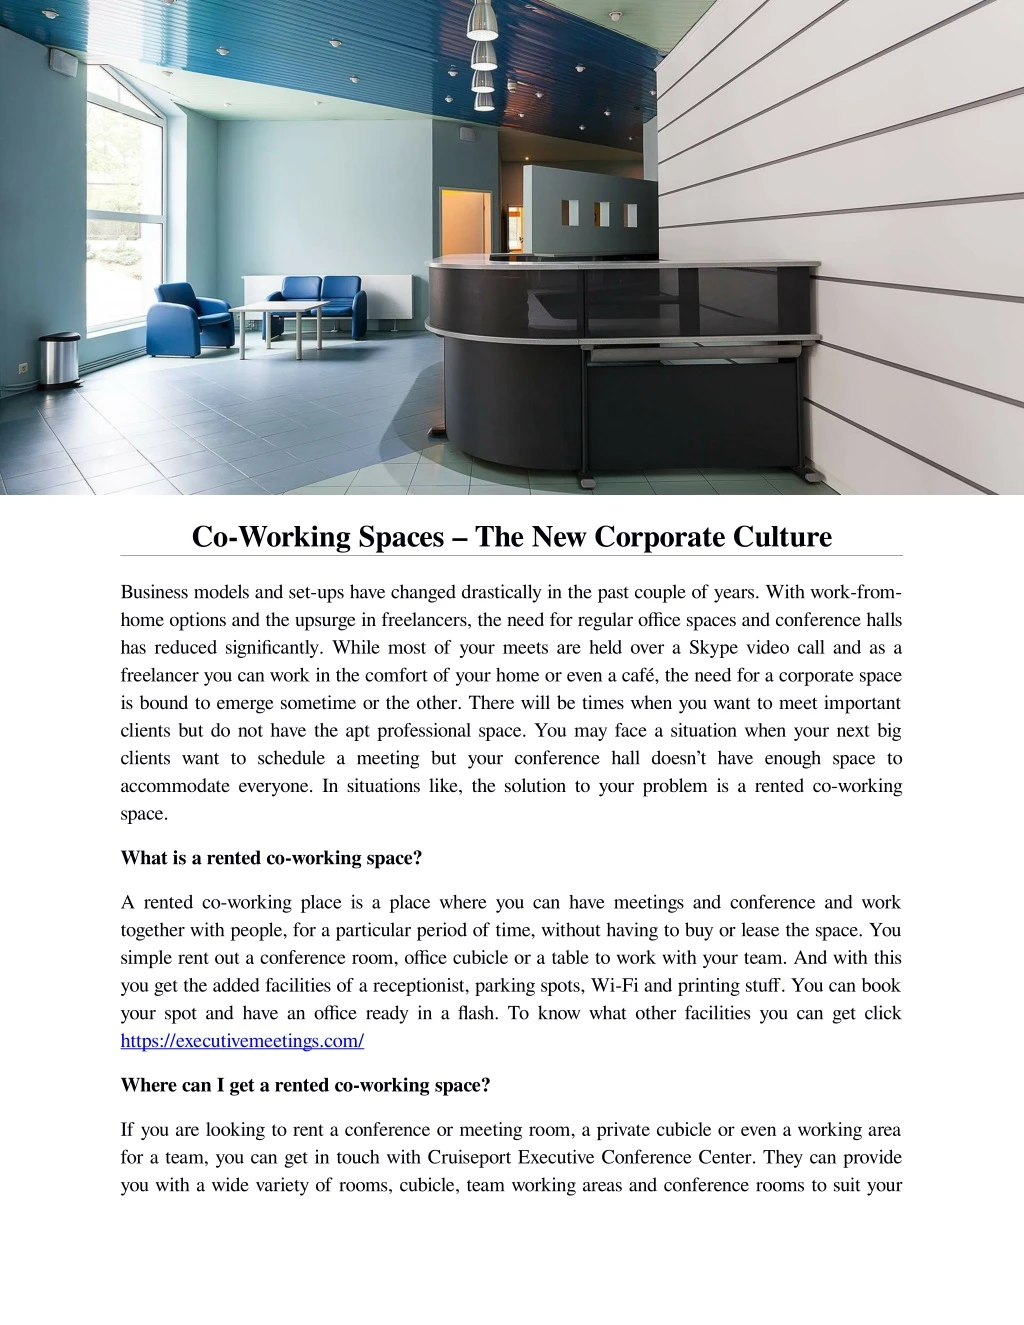 co working spaces the new corporate culture